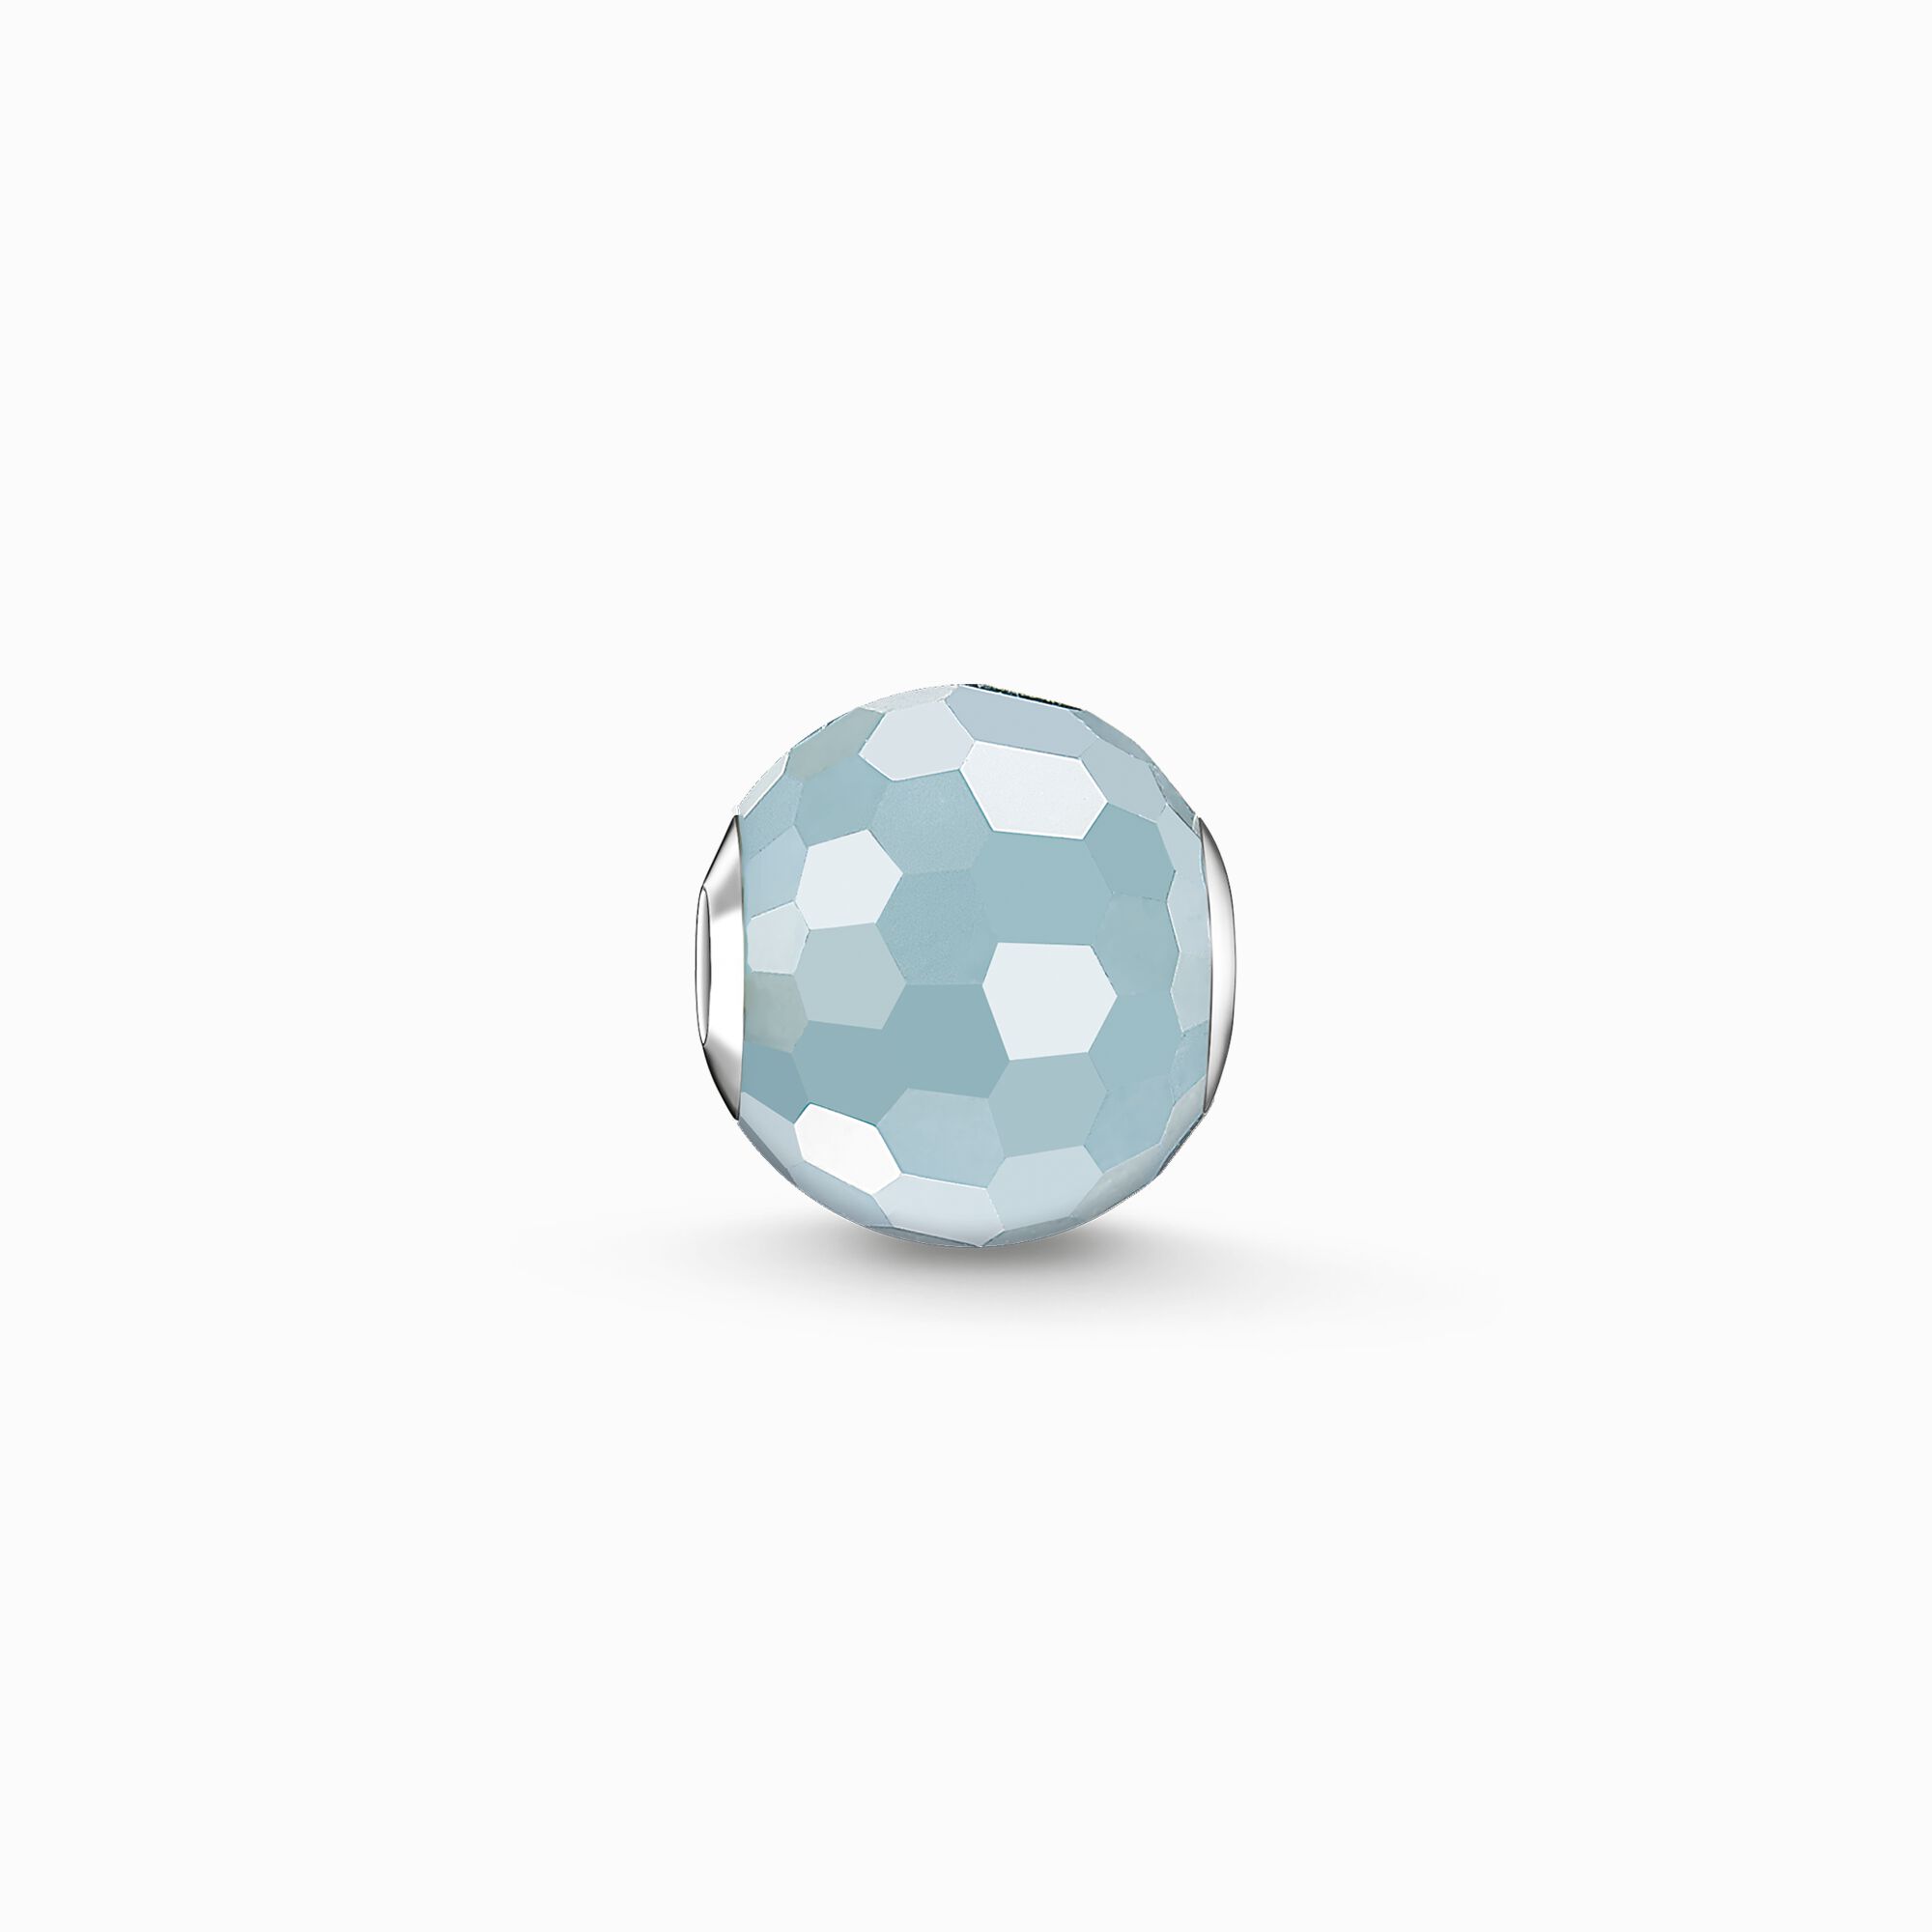 Bead light-blue from the Karma Beads collection in the THOMAS SABO online store